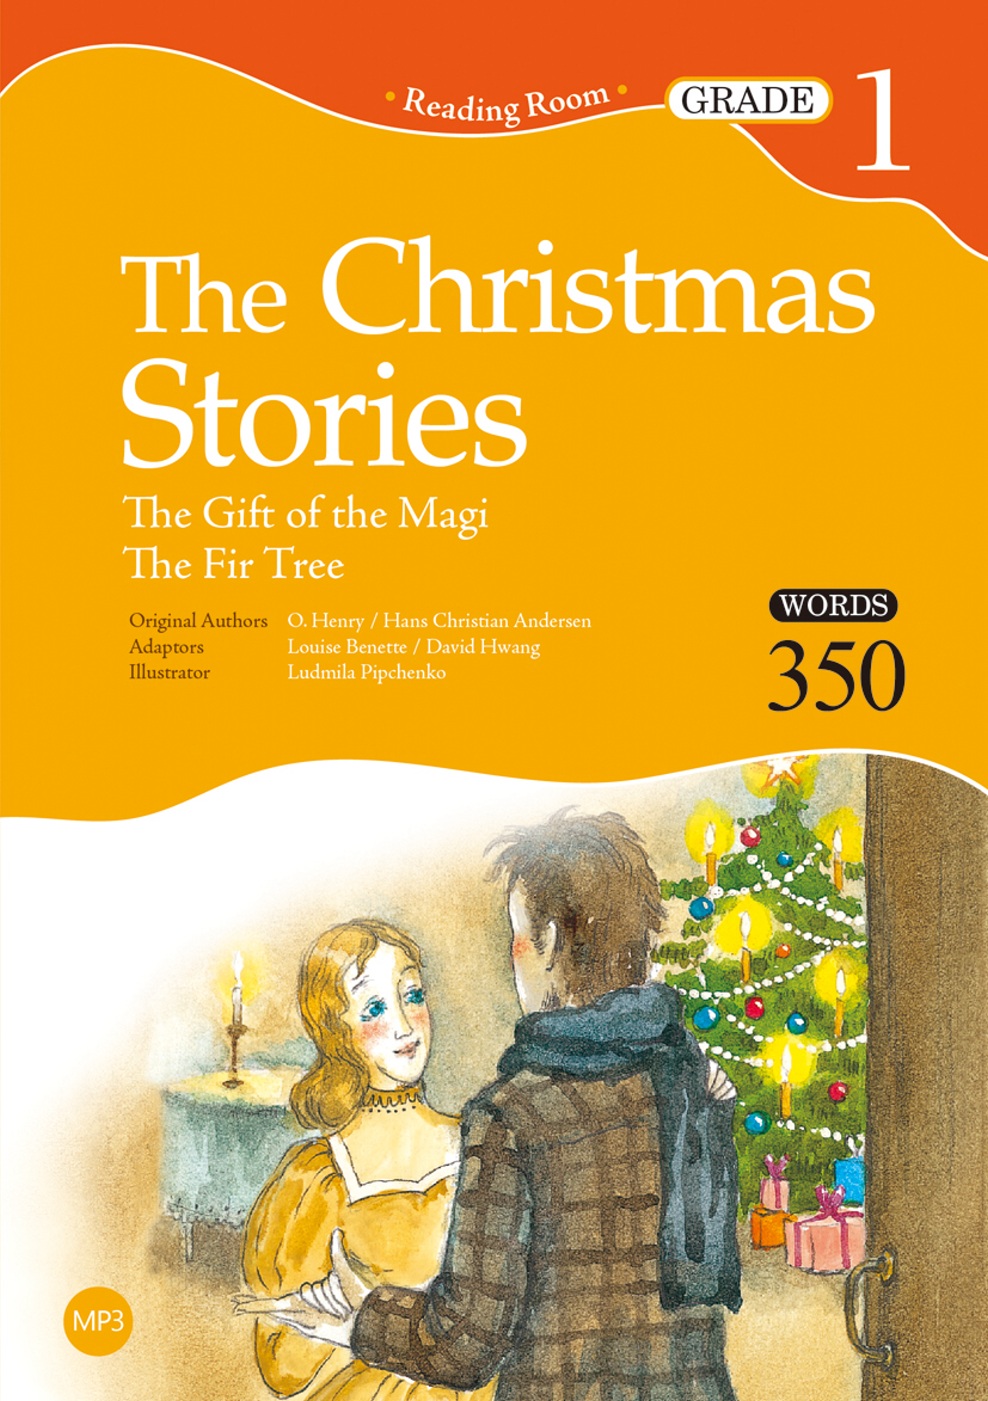 The Christmas Stories：The Gift of the Magi, The Fir Tree【Grade 1】（25K經典文學改寫讀本+1MP3）